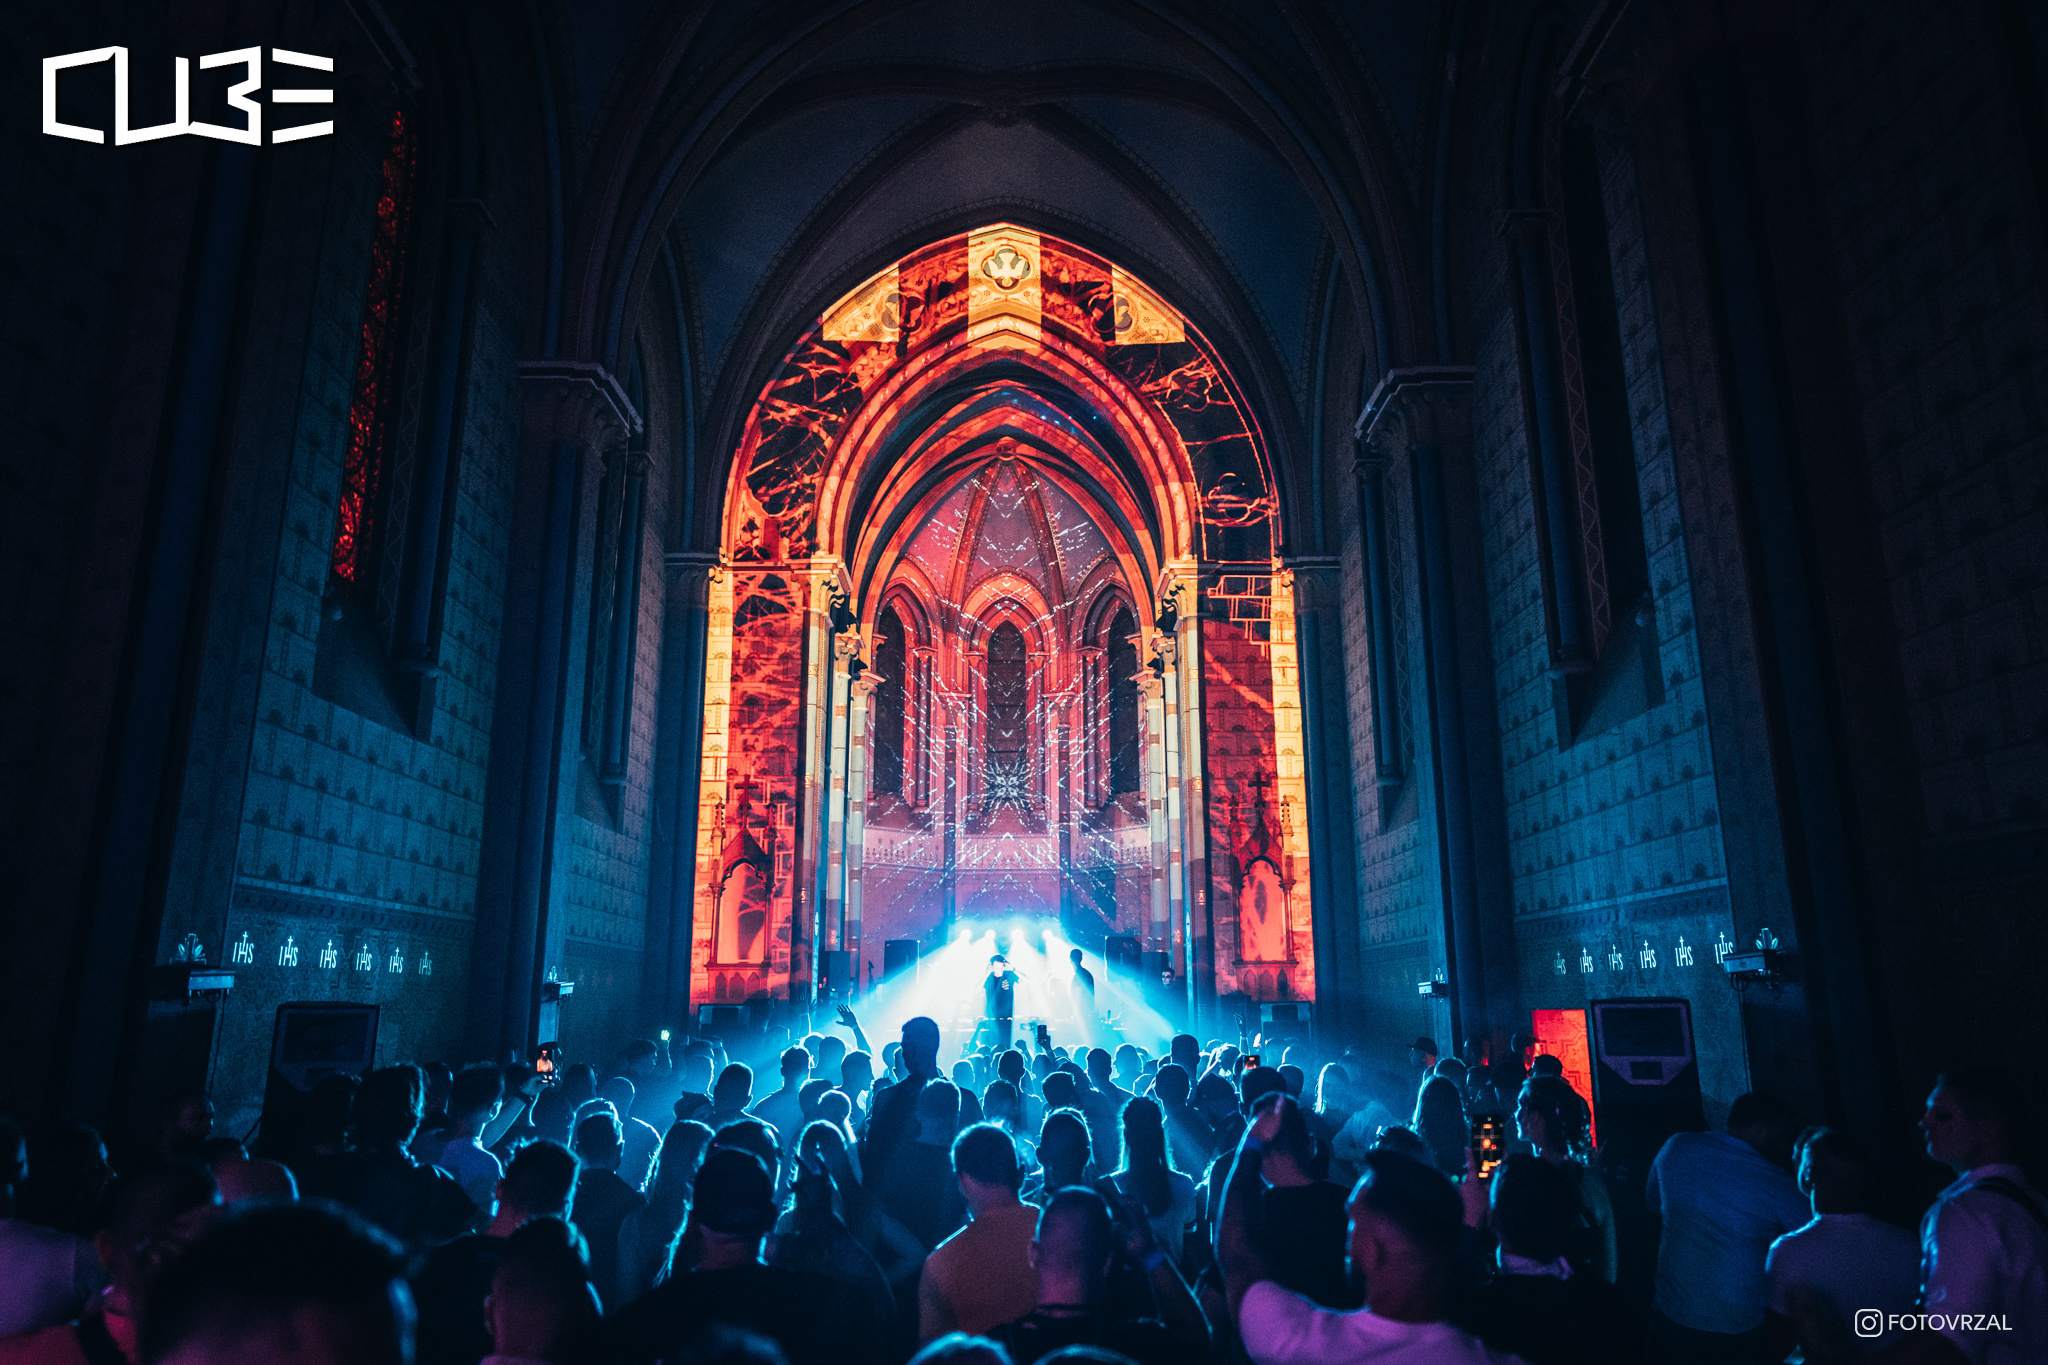 NYE RAVE in the CHURCH † - フライヤー表